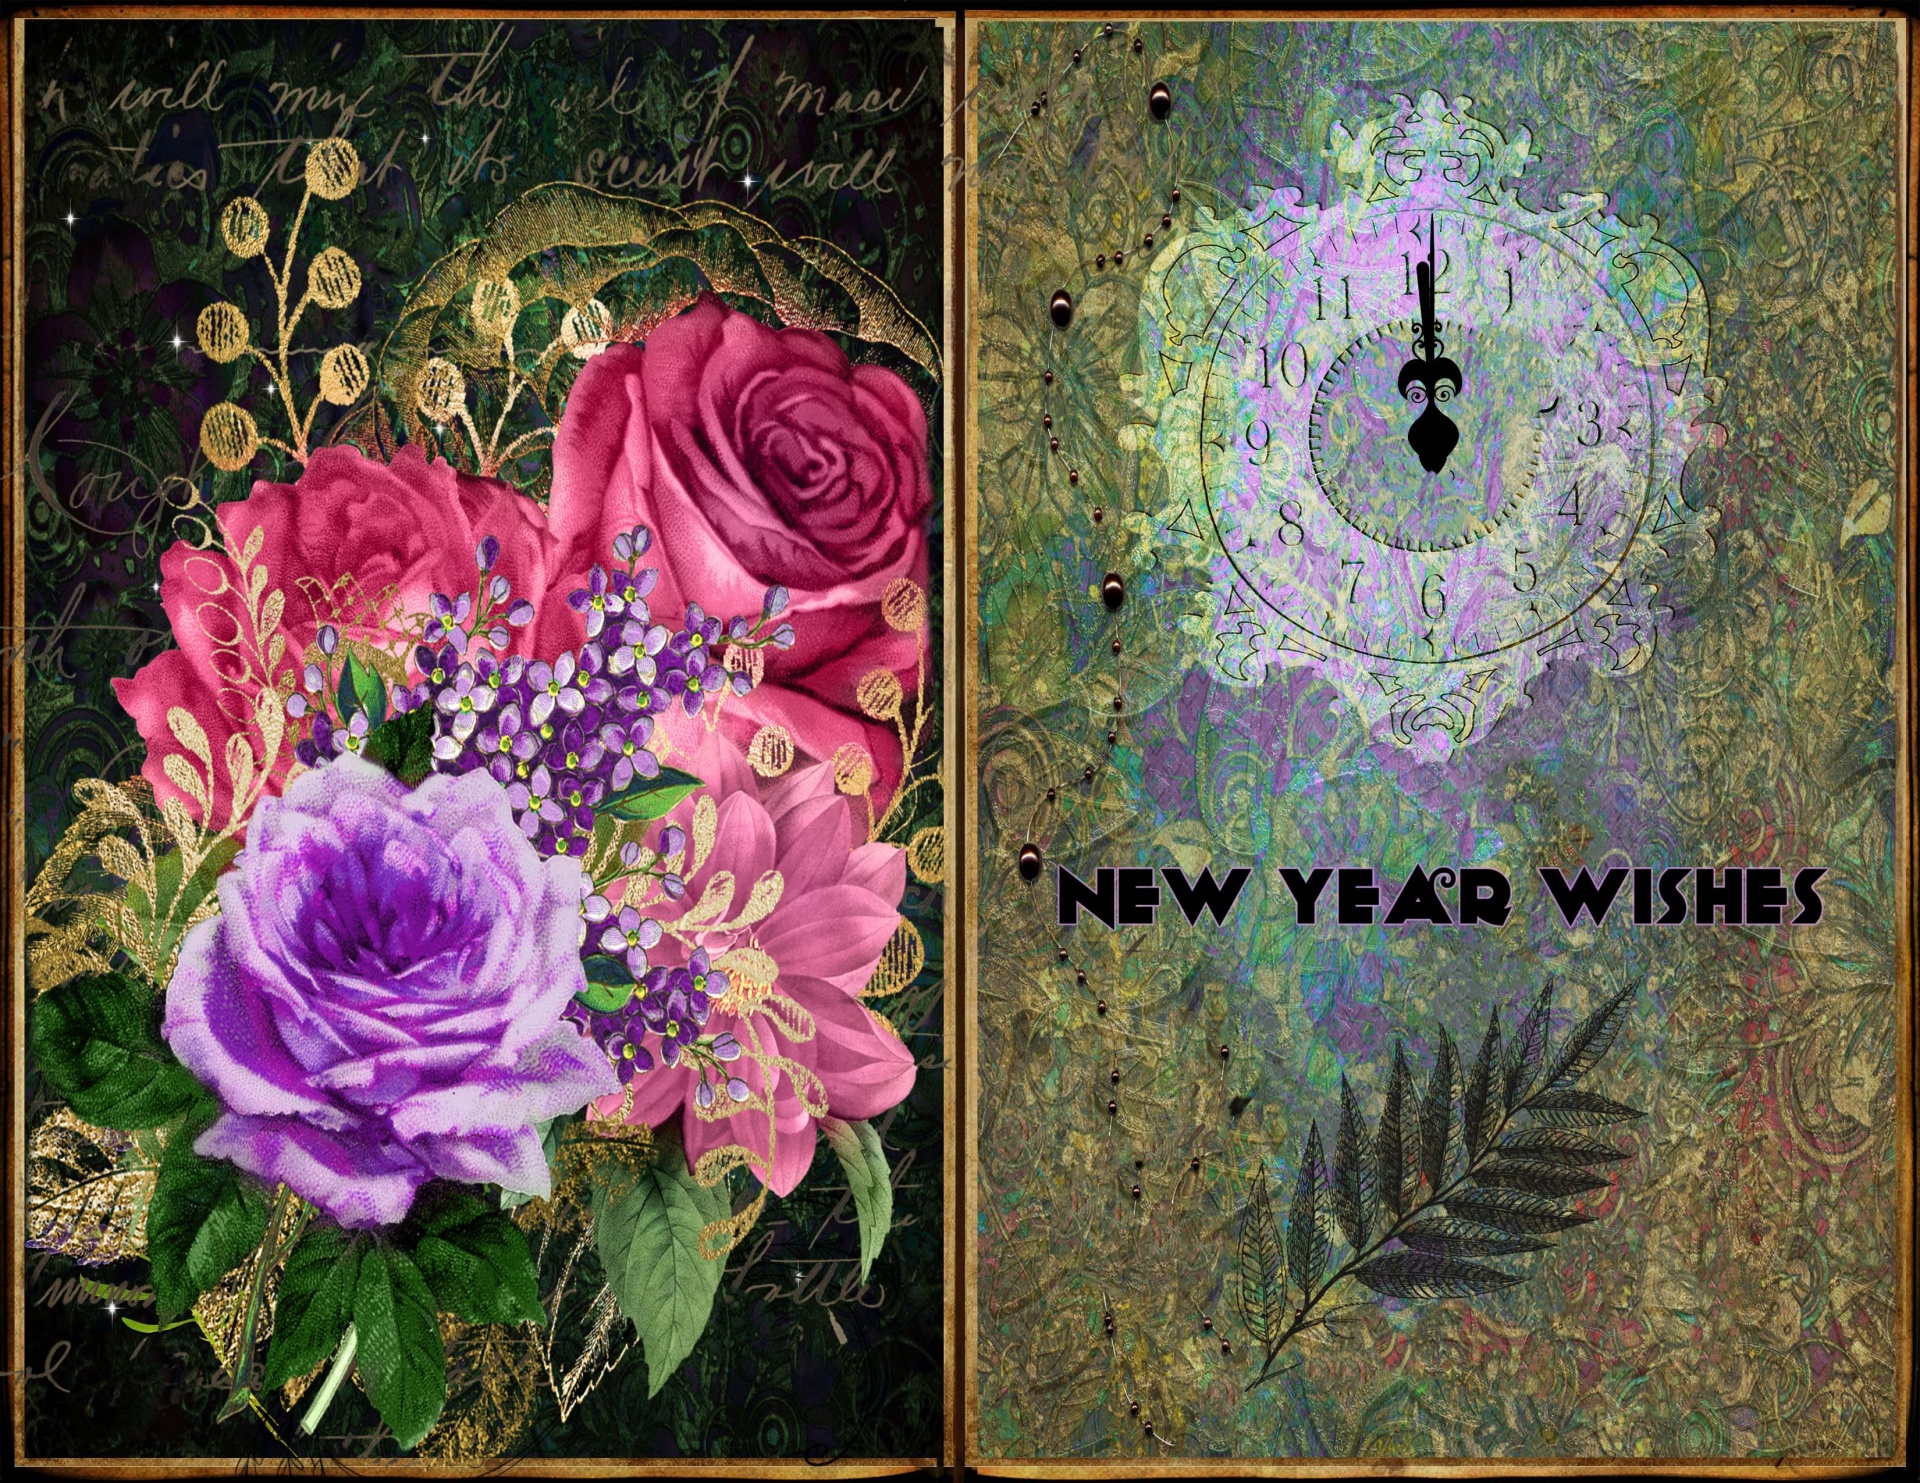 vintage floral card with New Year Wishes - an ornate antique clock is almost at midnight